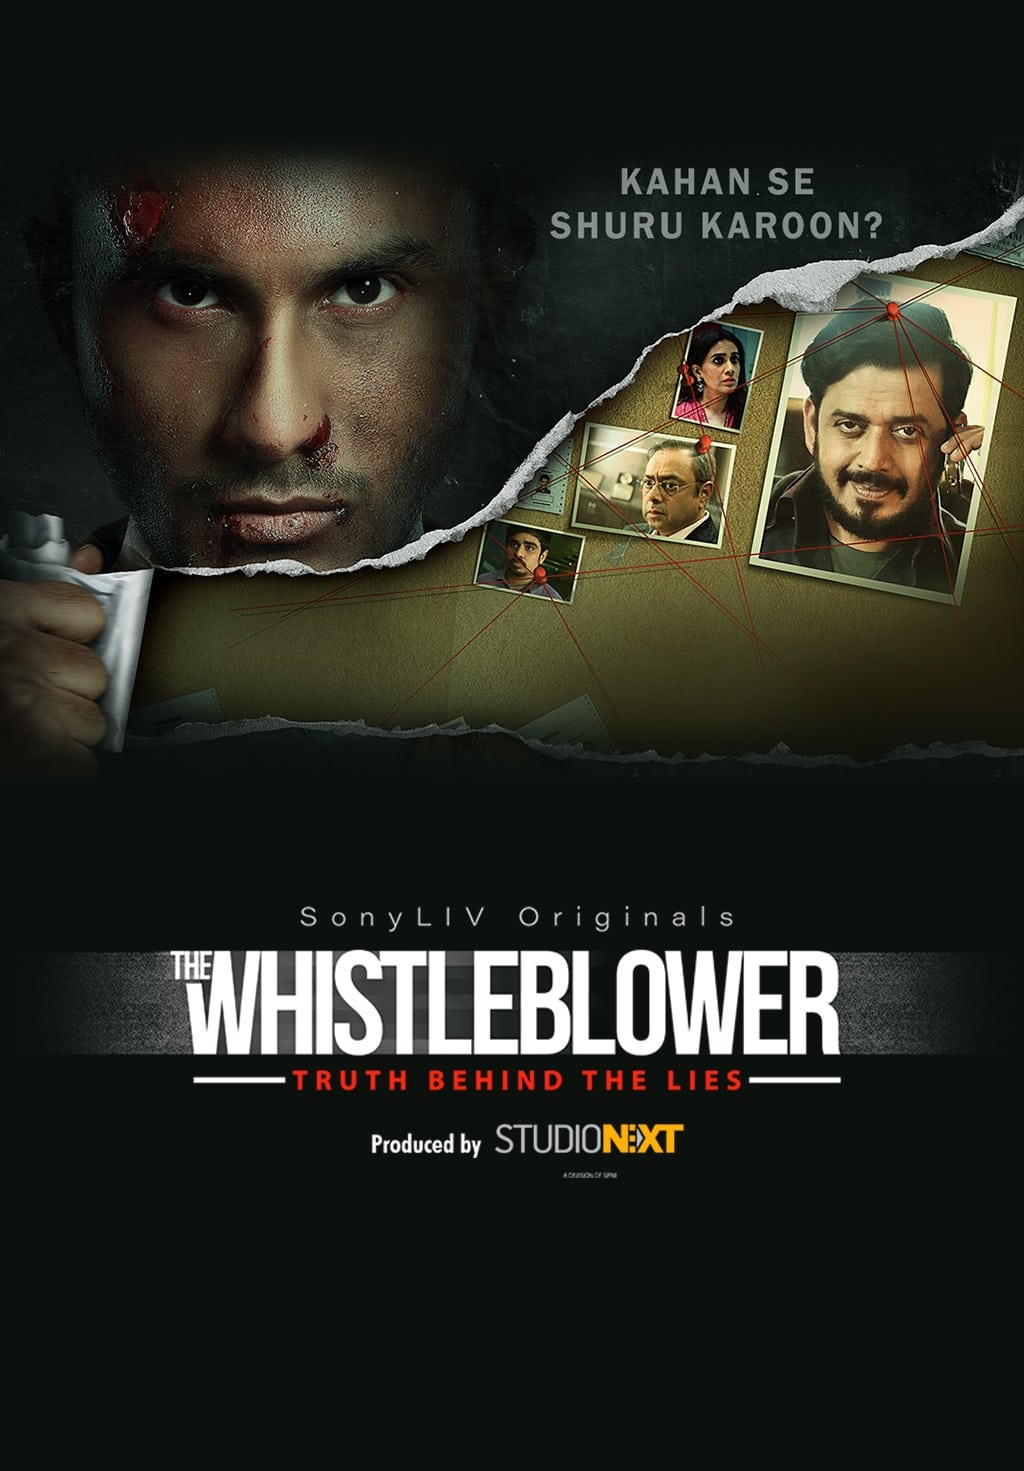 The Whistleblower TV Shows About Scam